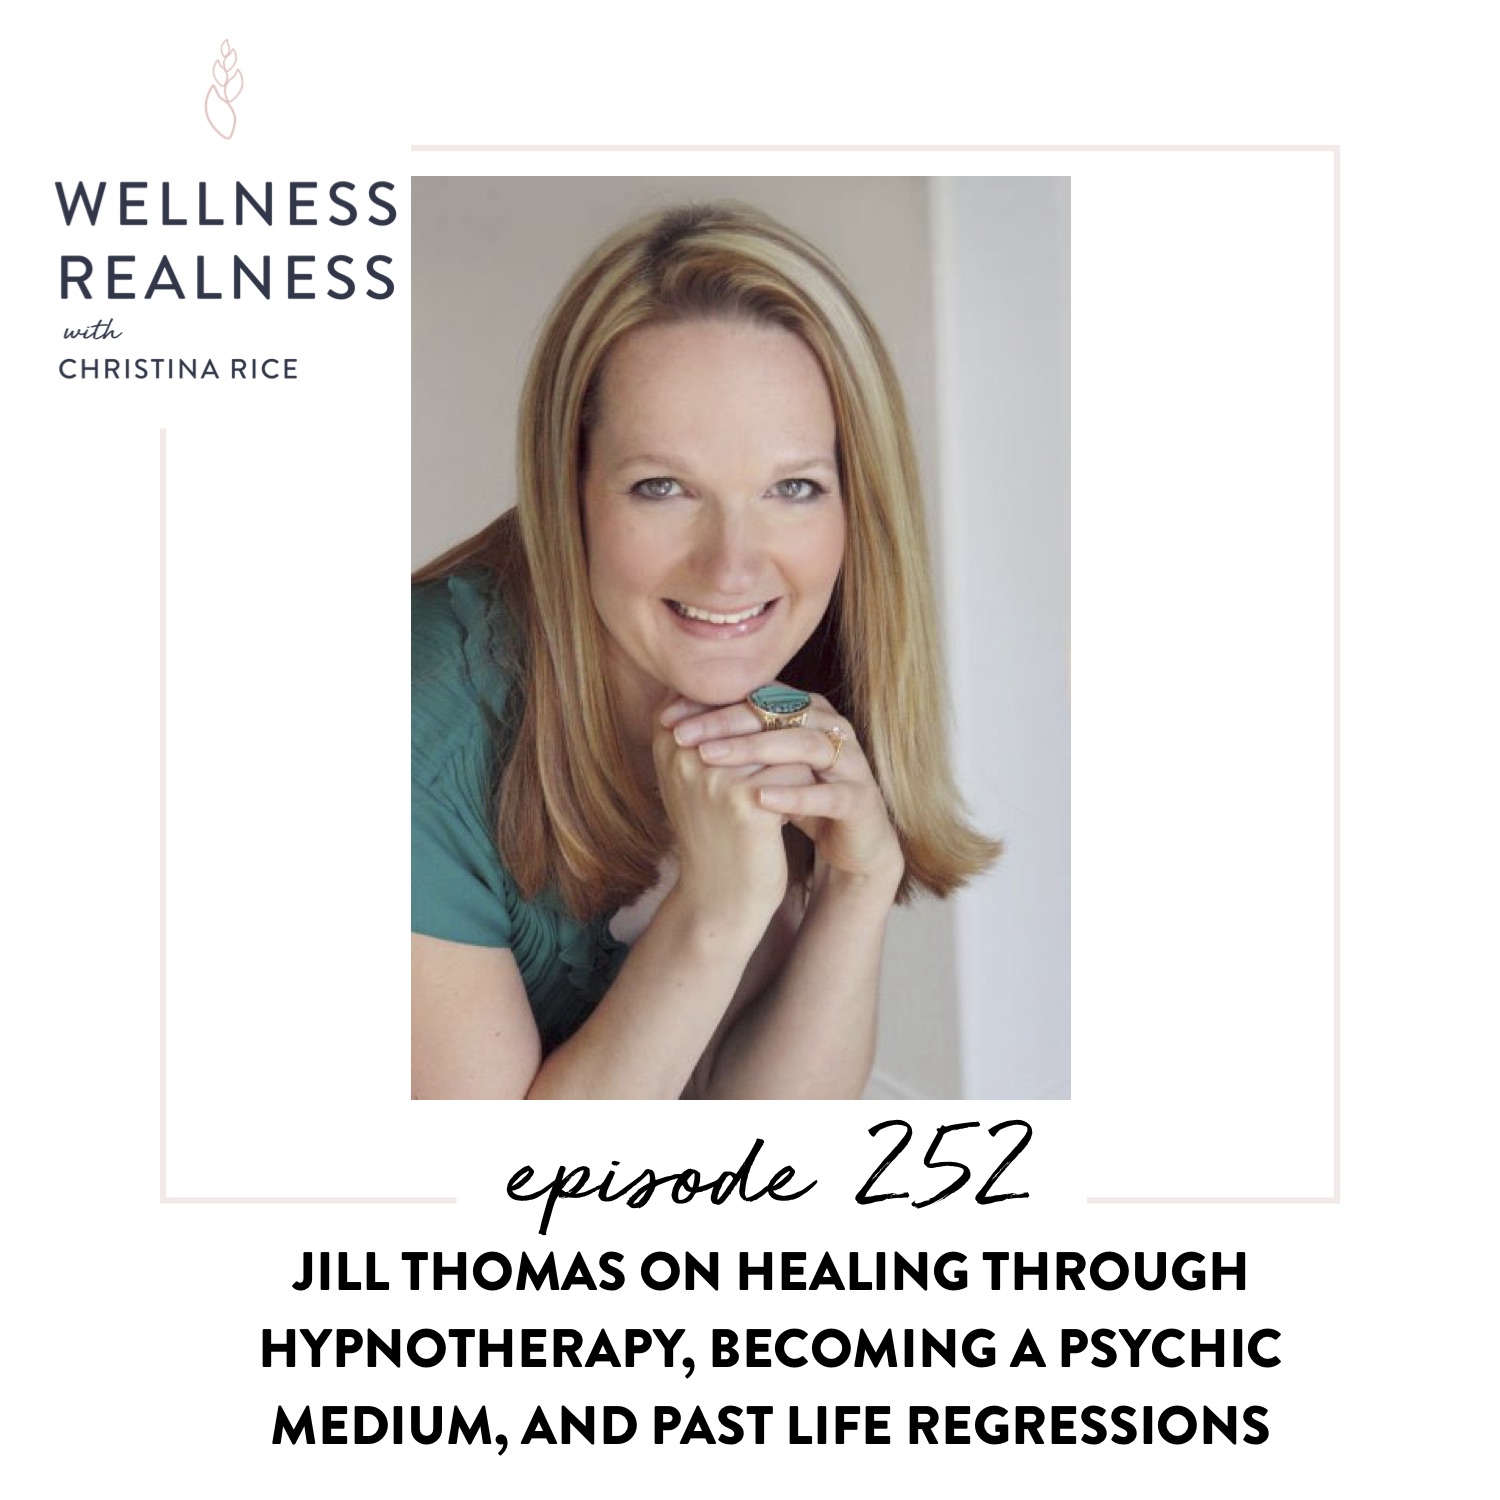 252: Jill Thomas on Healing through Hypnotherapy, Becoming a Psychic Medium, and Past Life Regressions